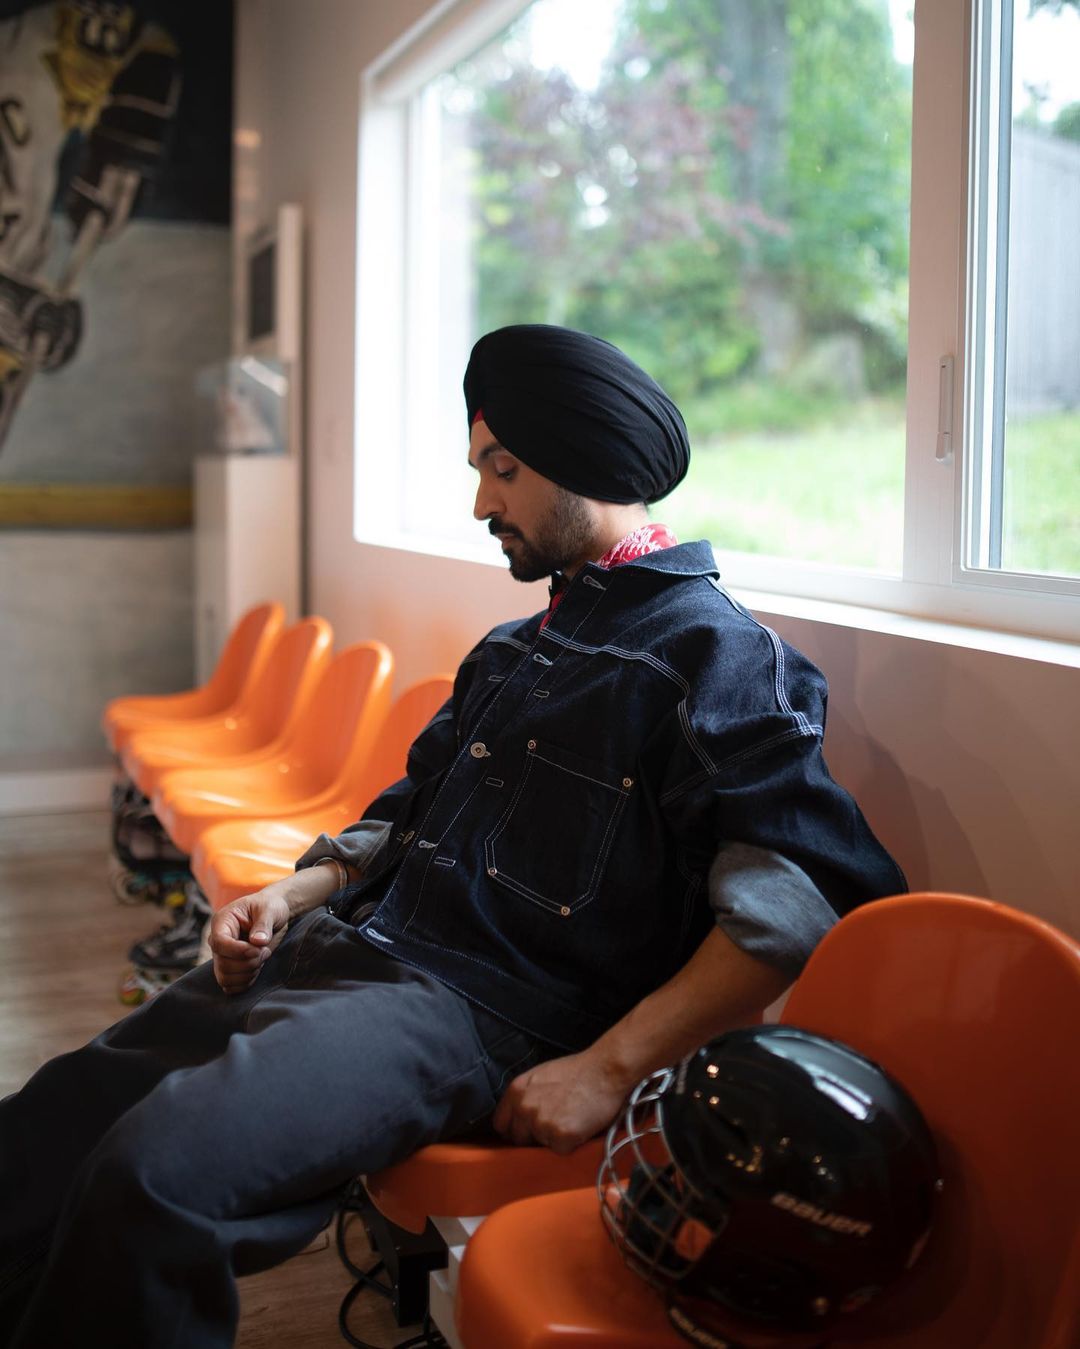 Diljit Dosanjh says he doesn't fit in Bollywood, adds 'all the talks are so  fake